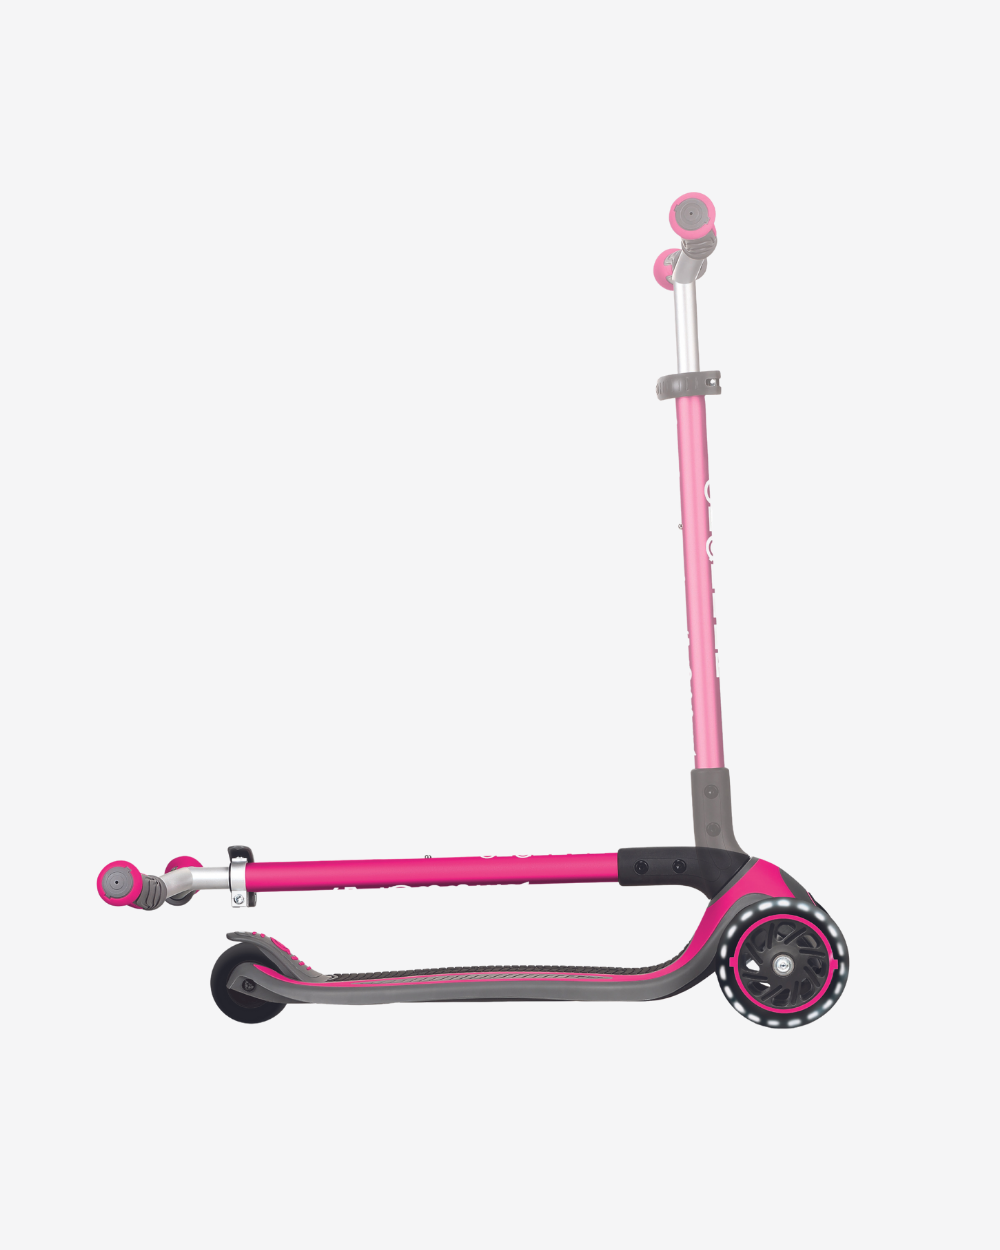 Globber Master 3 Wheel Kids Scooter with Lights | Pink